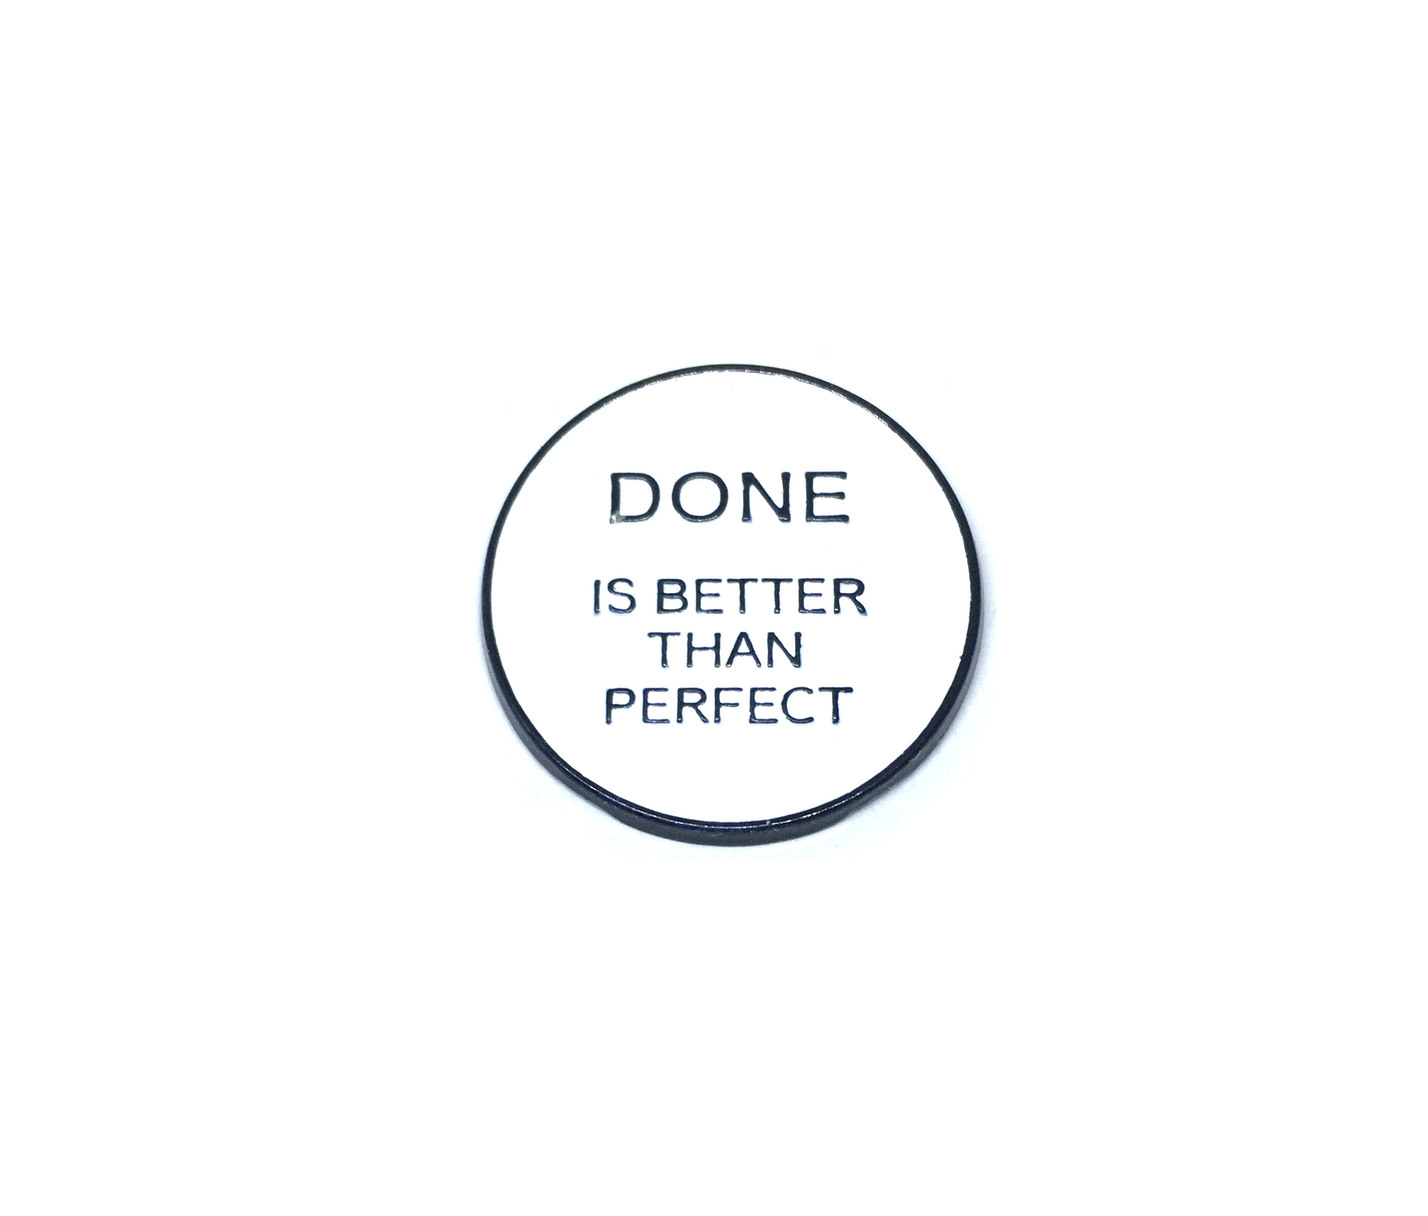 "Done is Better than Perfect" Round Pin